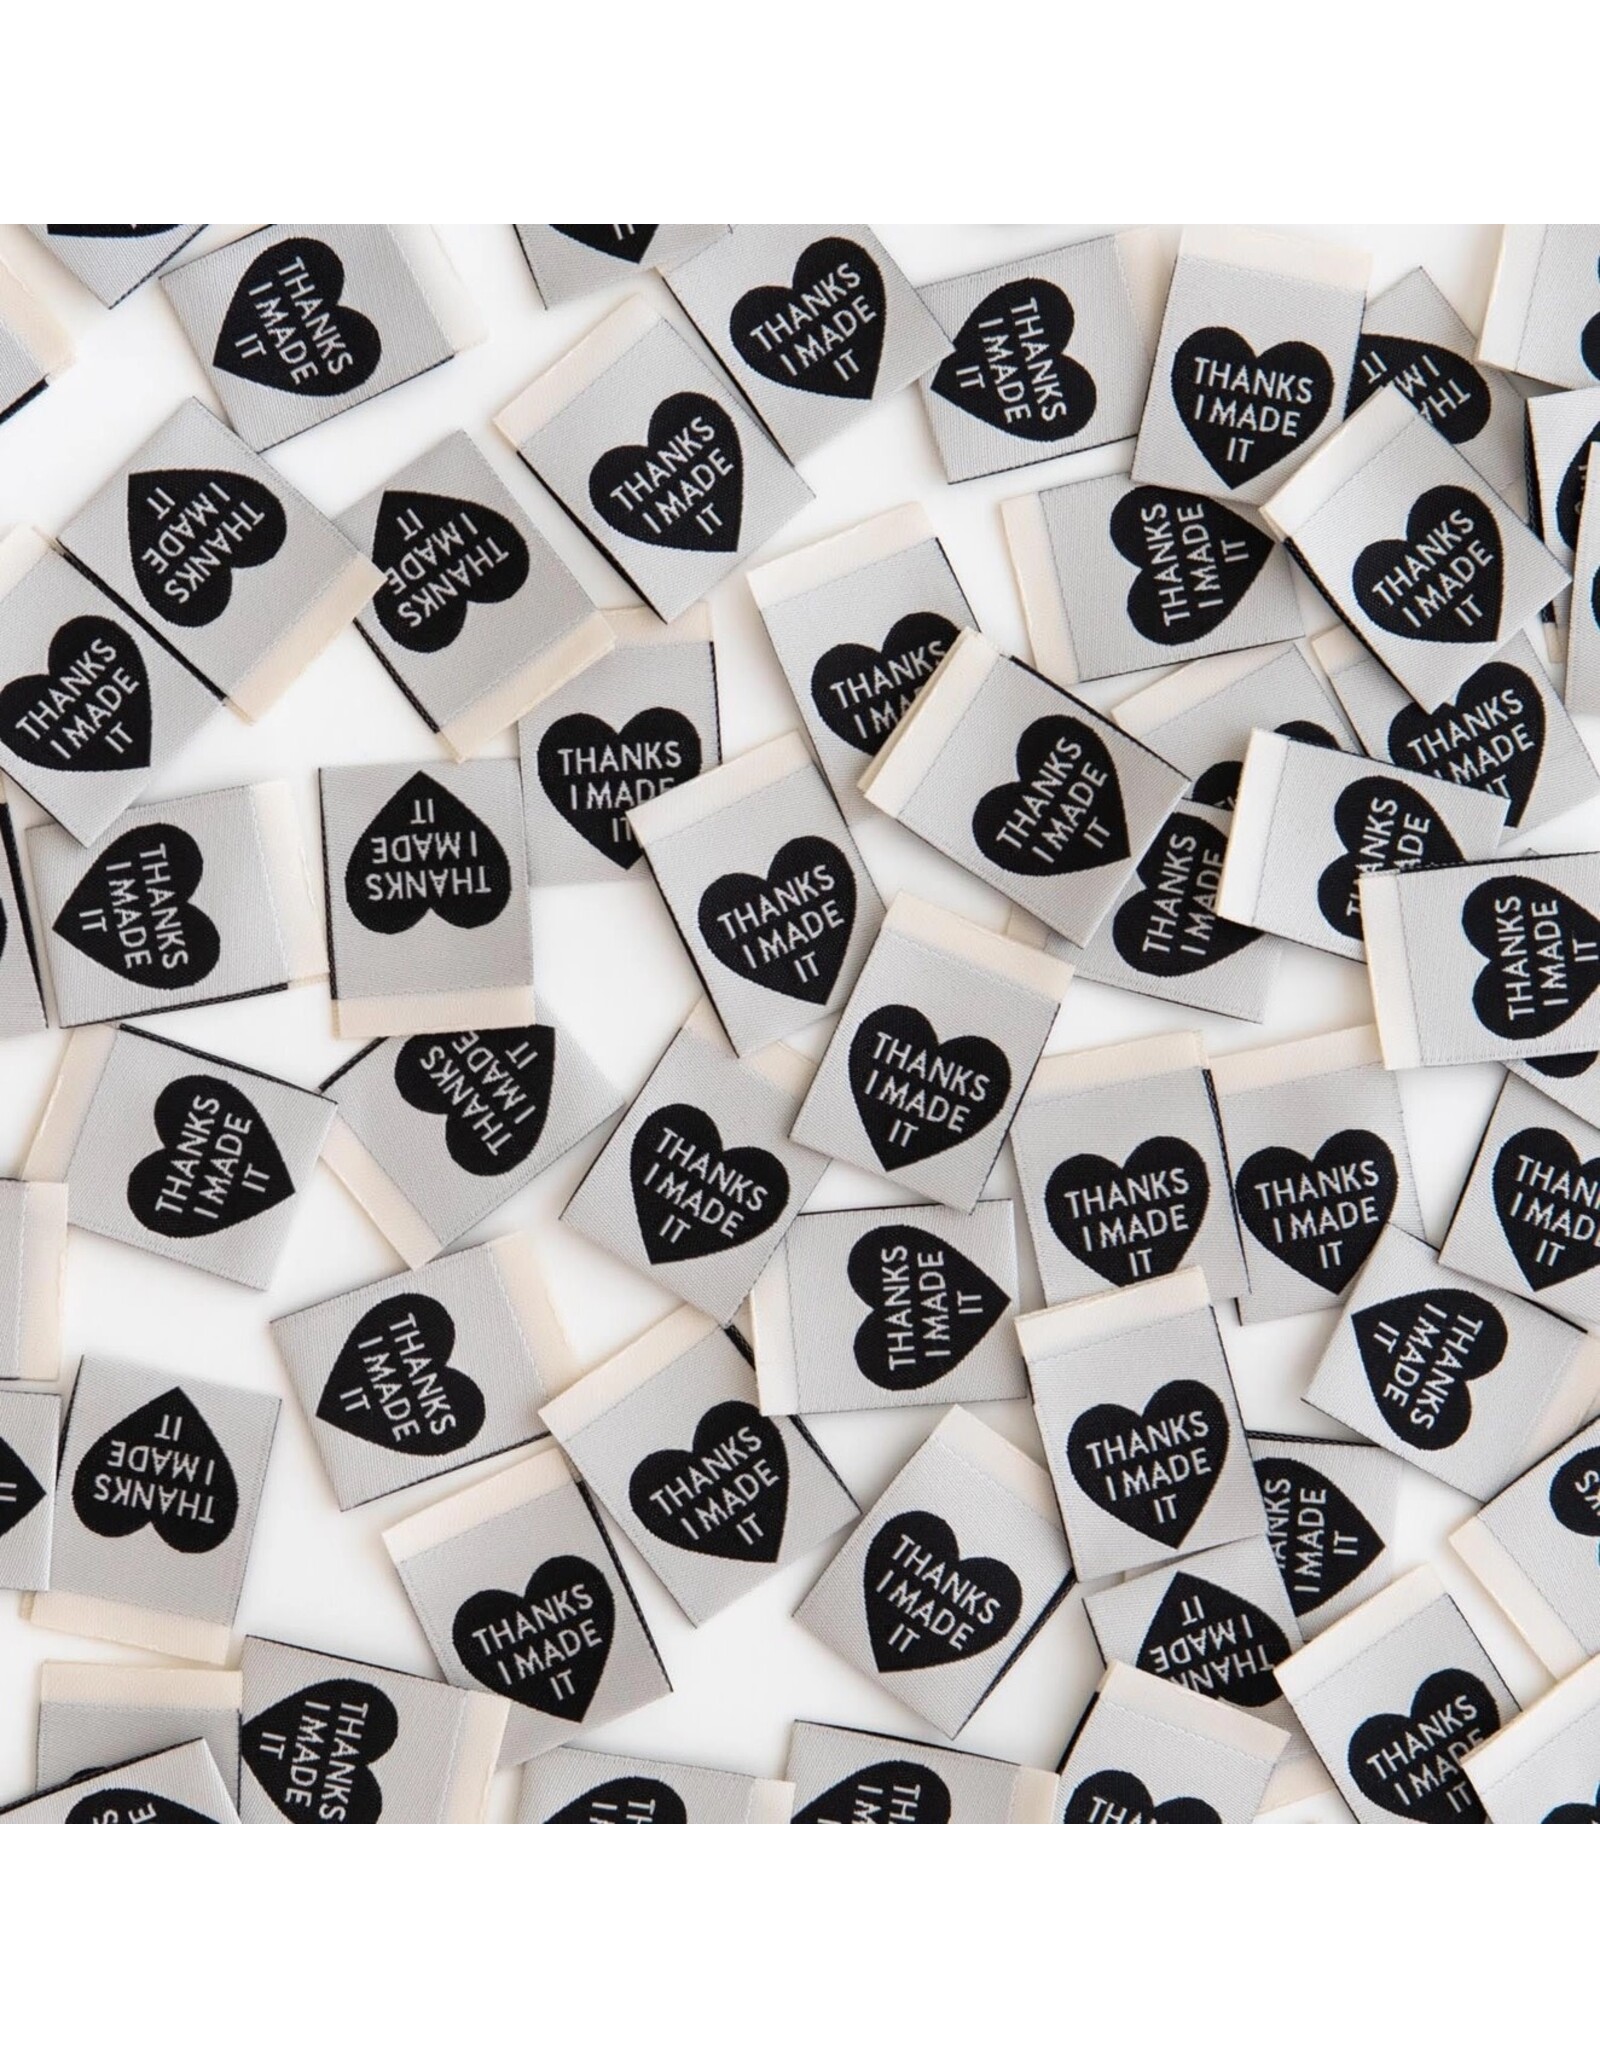 Sarah Hearts Thanks I Made It - Woven Label Tags, Set of 8